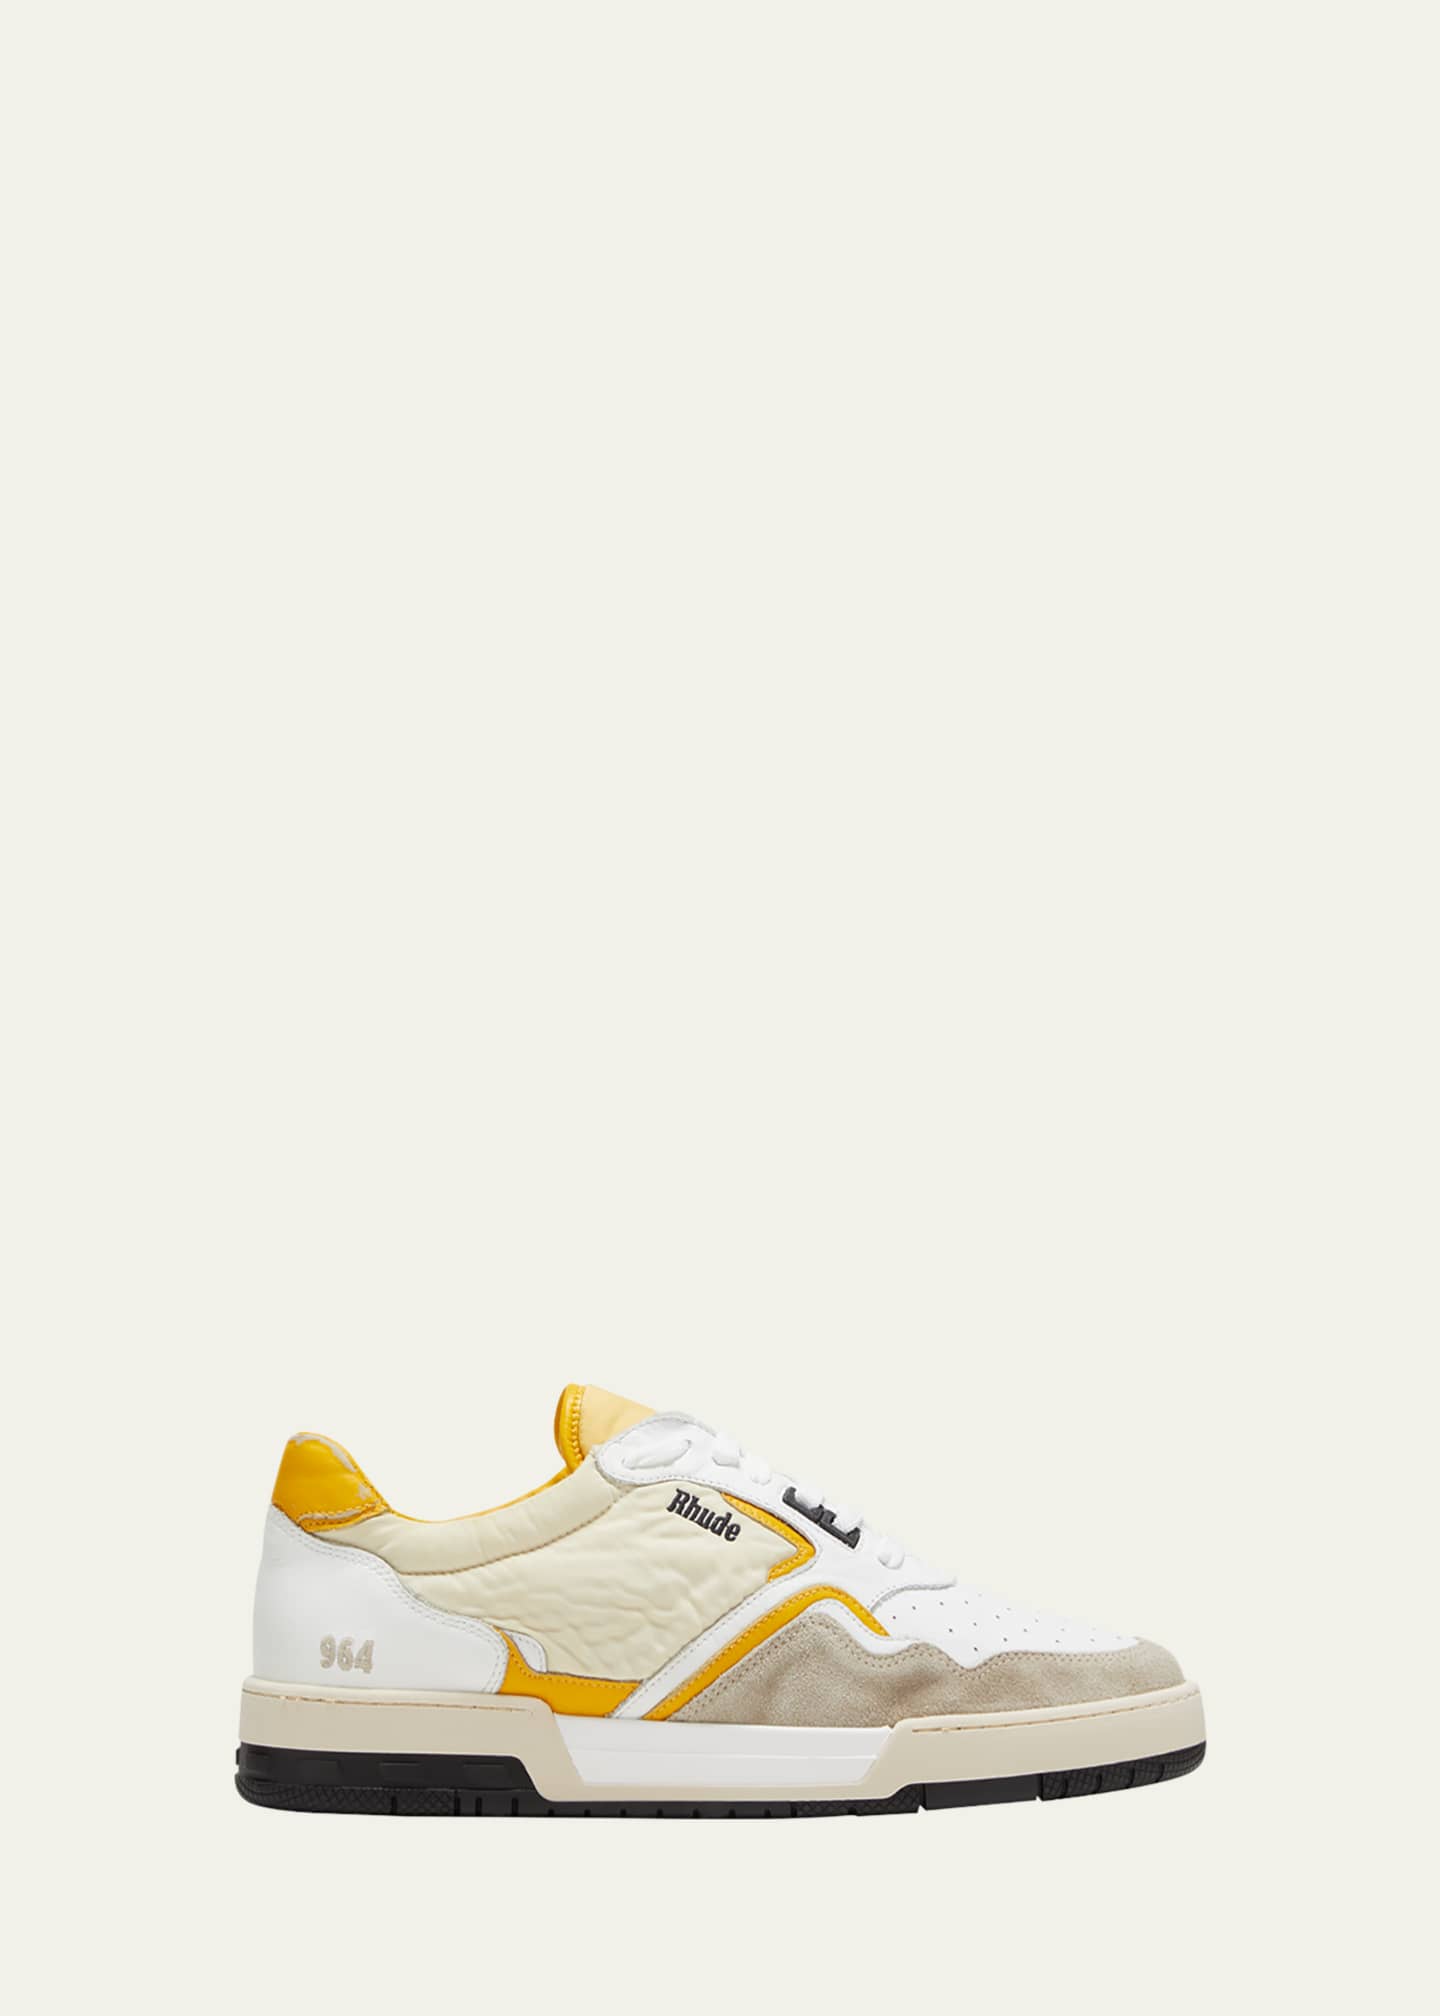 Rhude Men's Leather and Textile Racing Low-Top Sneakers - Bergdorf Goodman